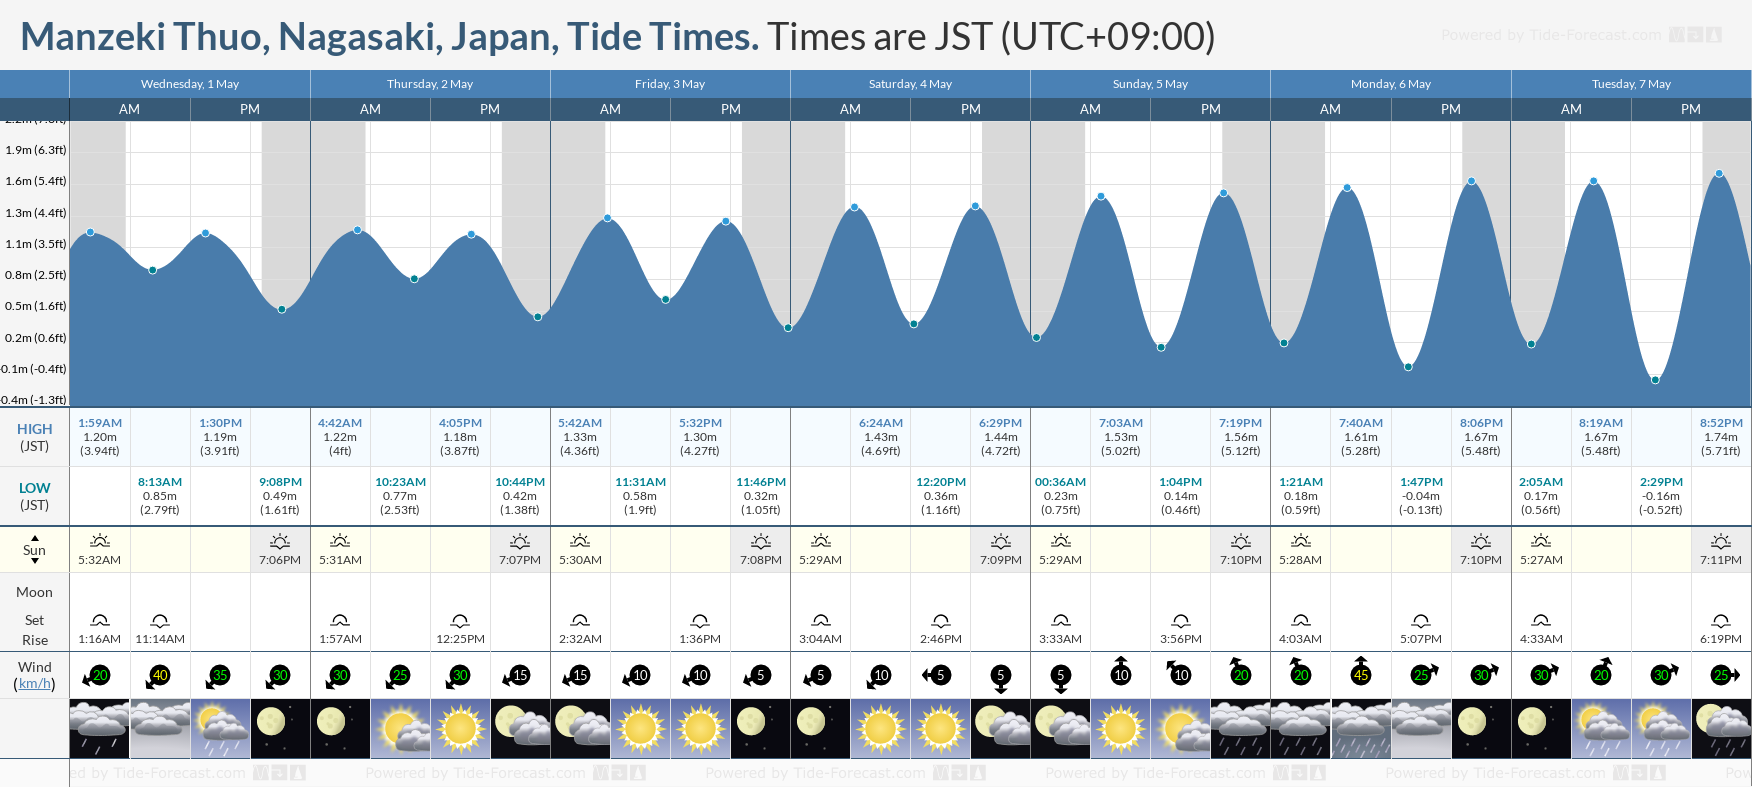 Manzeki Thuo, Nagasaki, Japan Tide Chart including high and low tide times for the next 7 days